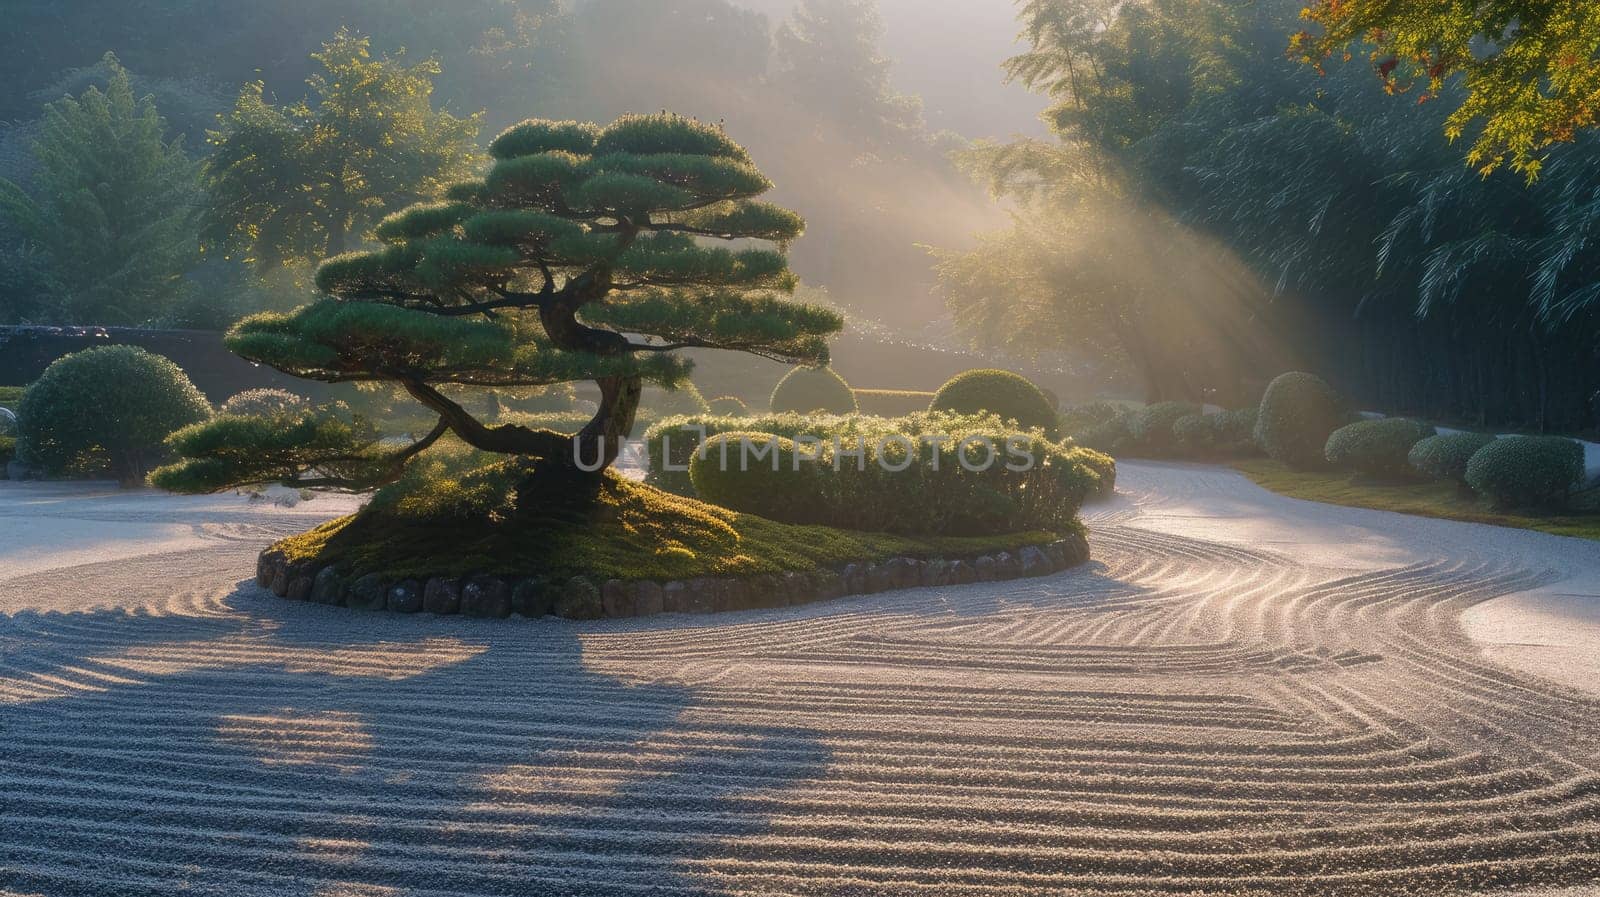 A beautiful sunrise illuminates a Japanese Zen garden, highlighting the elegant forms of meticulously maintained bonsai trees. Resplendent.